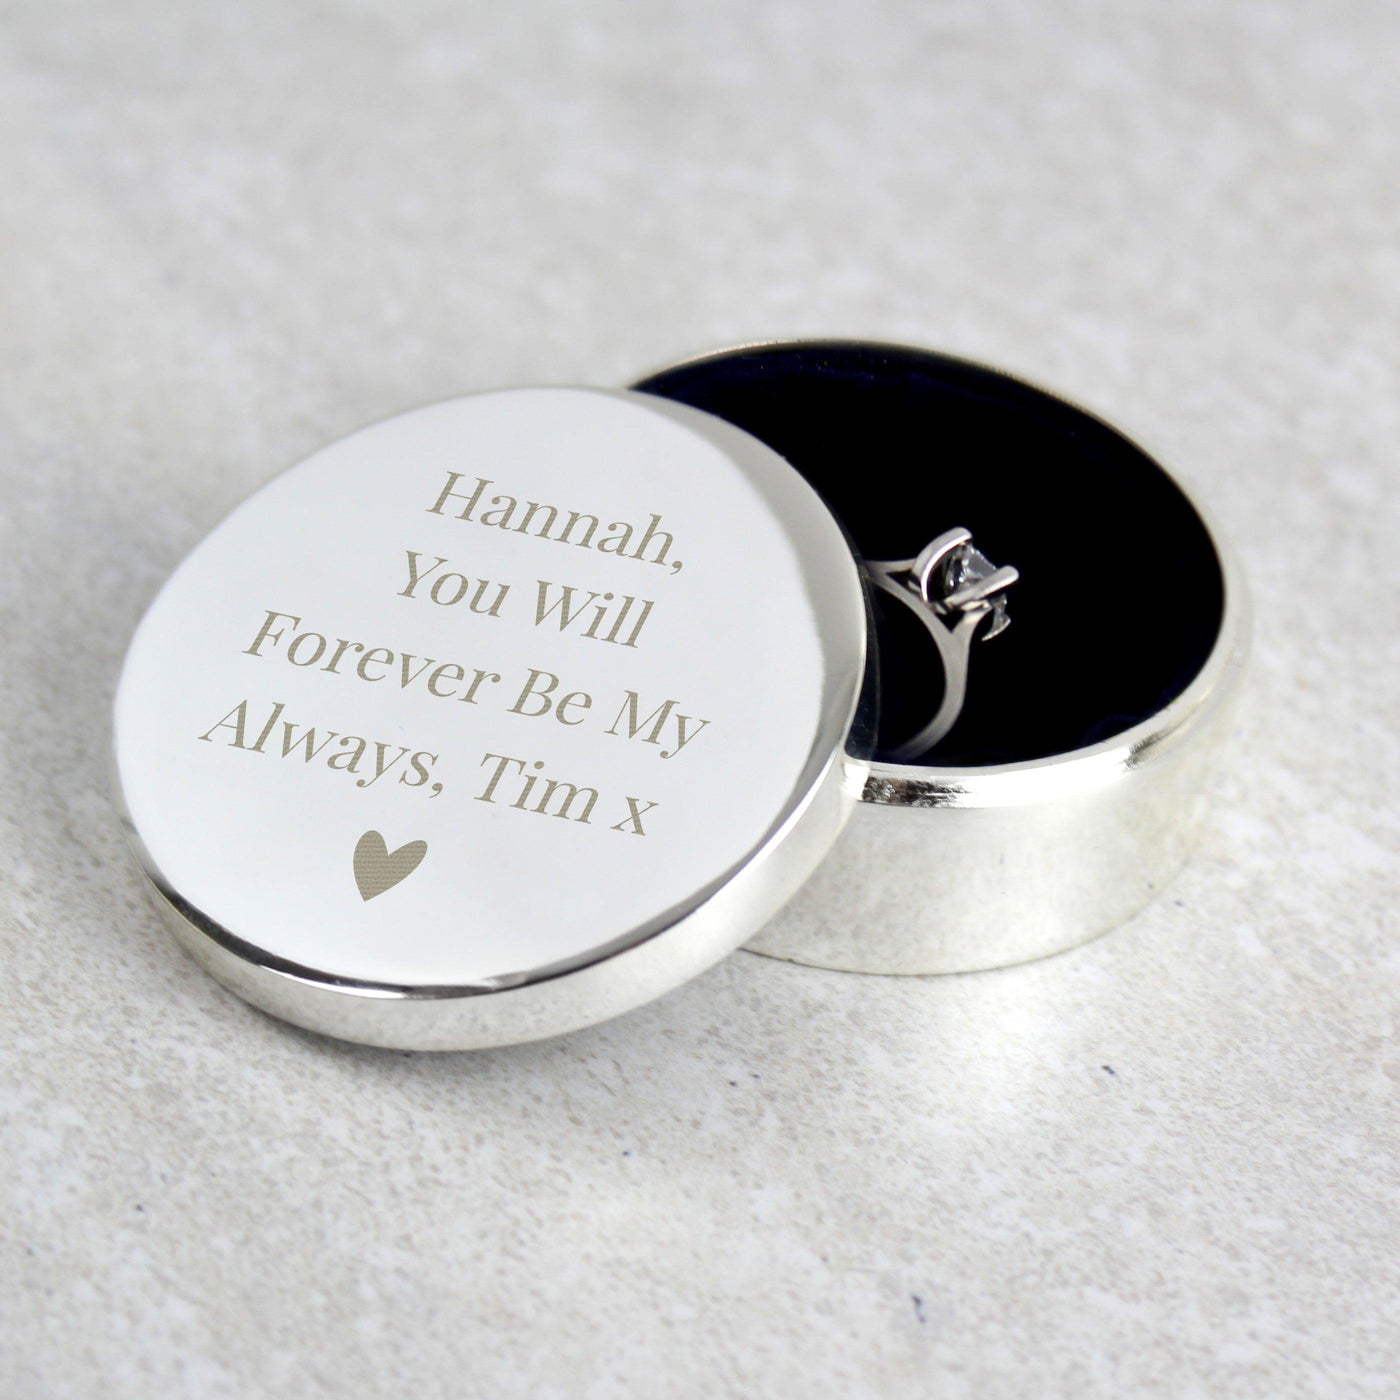 Personalised Round Ring Box - Shop Personalised Gifts